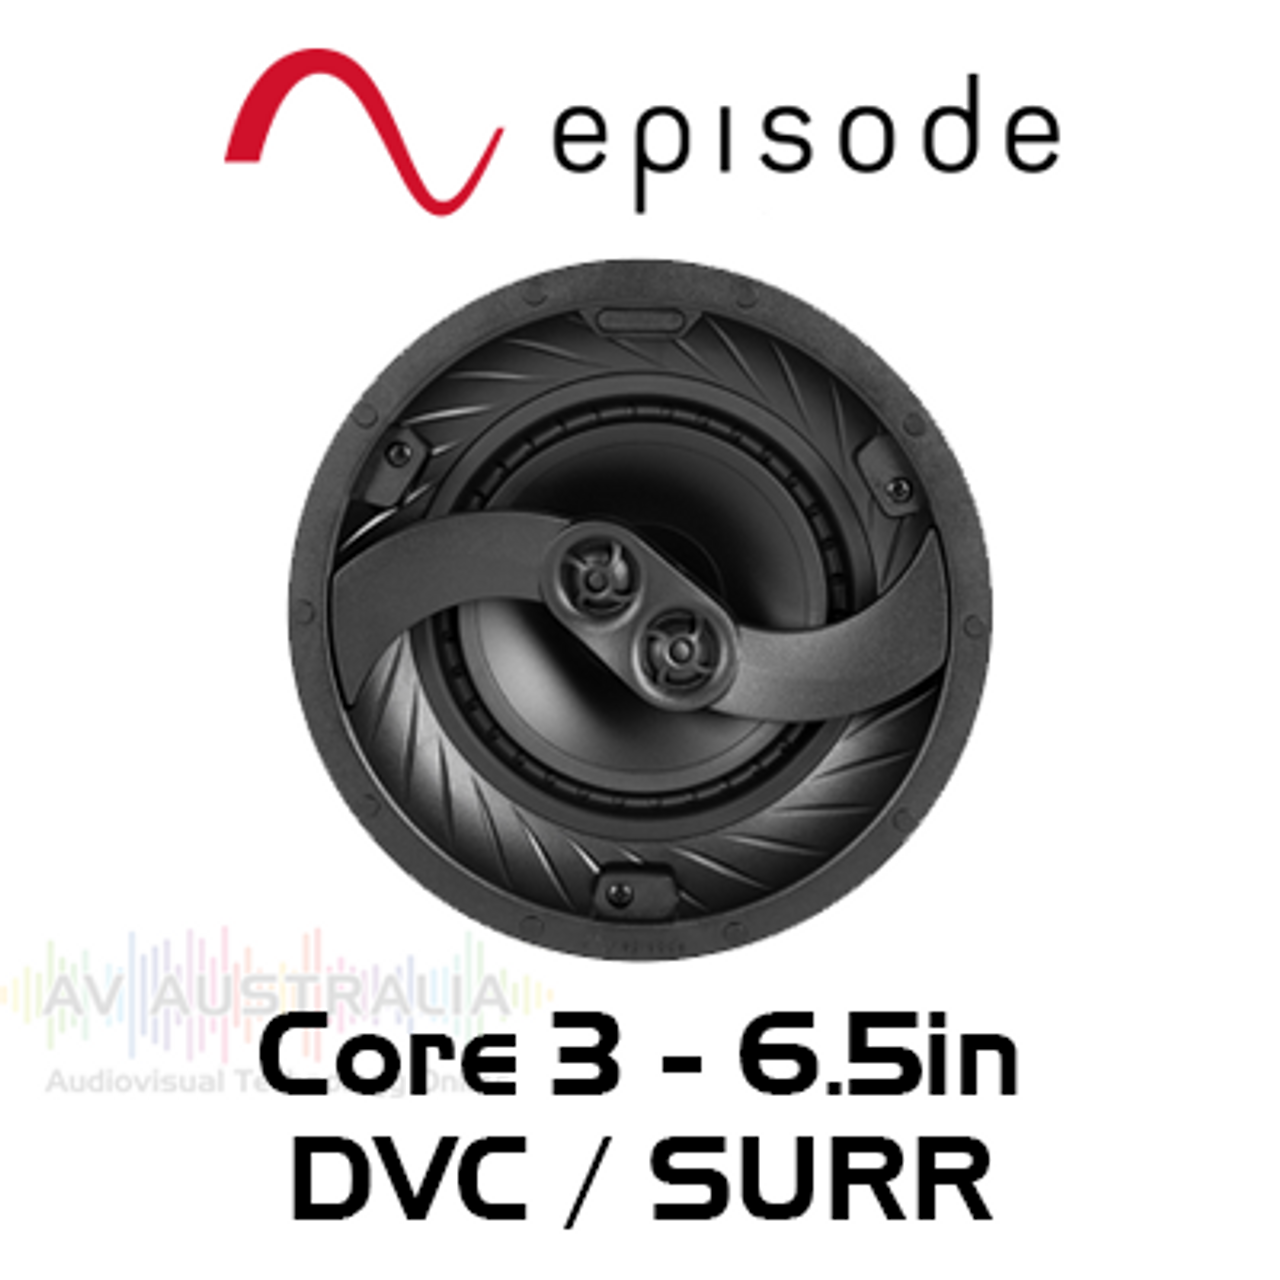 Episode Core 3 Series 6.5" DVC / Surround In-Ceiling Speaker (Each)